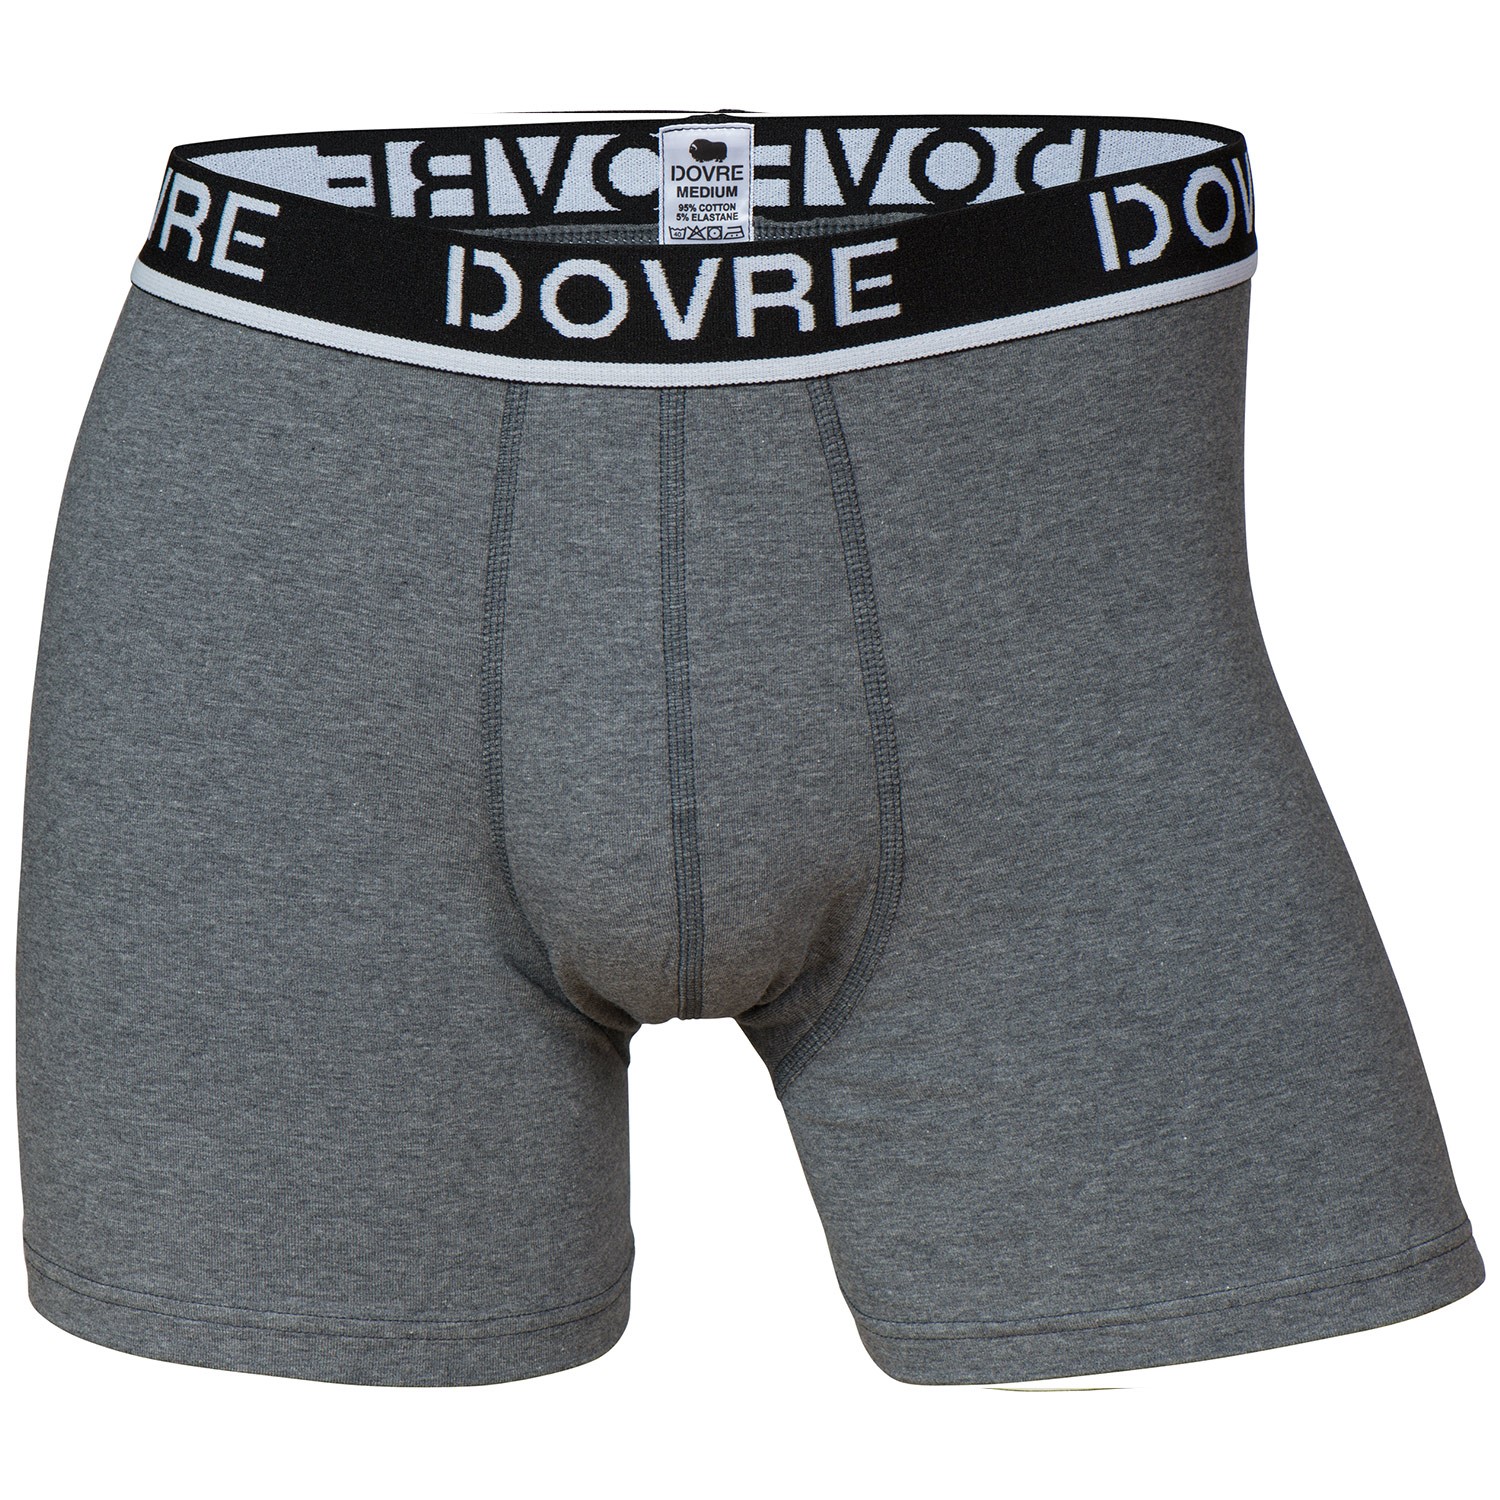 Dovre Trend Tights Boxer